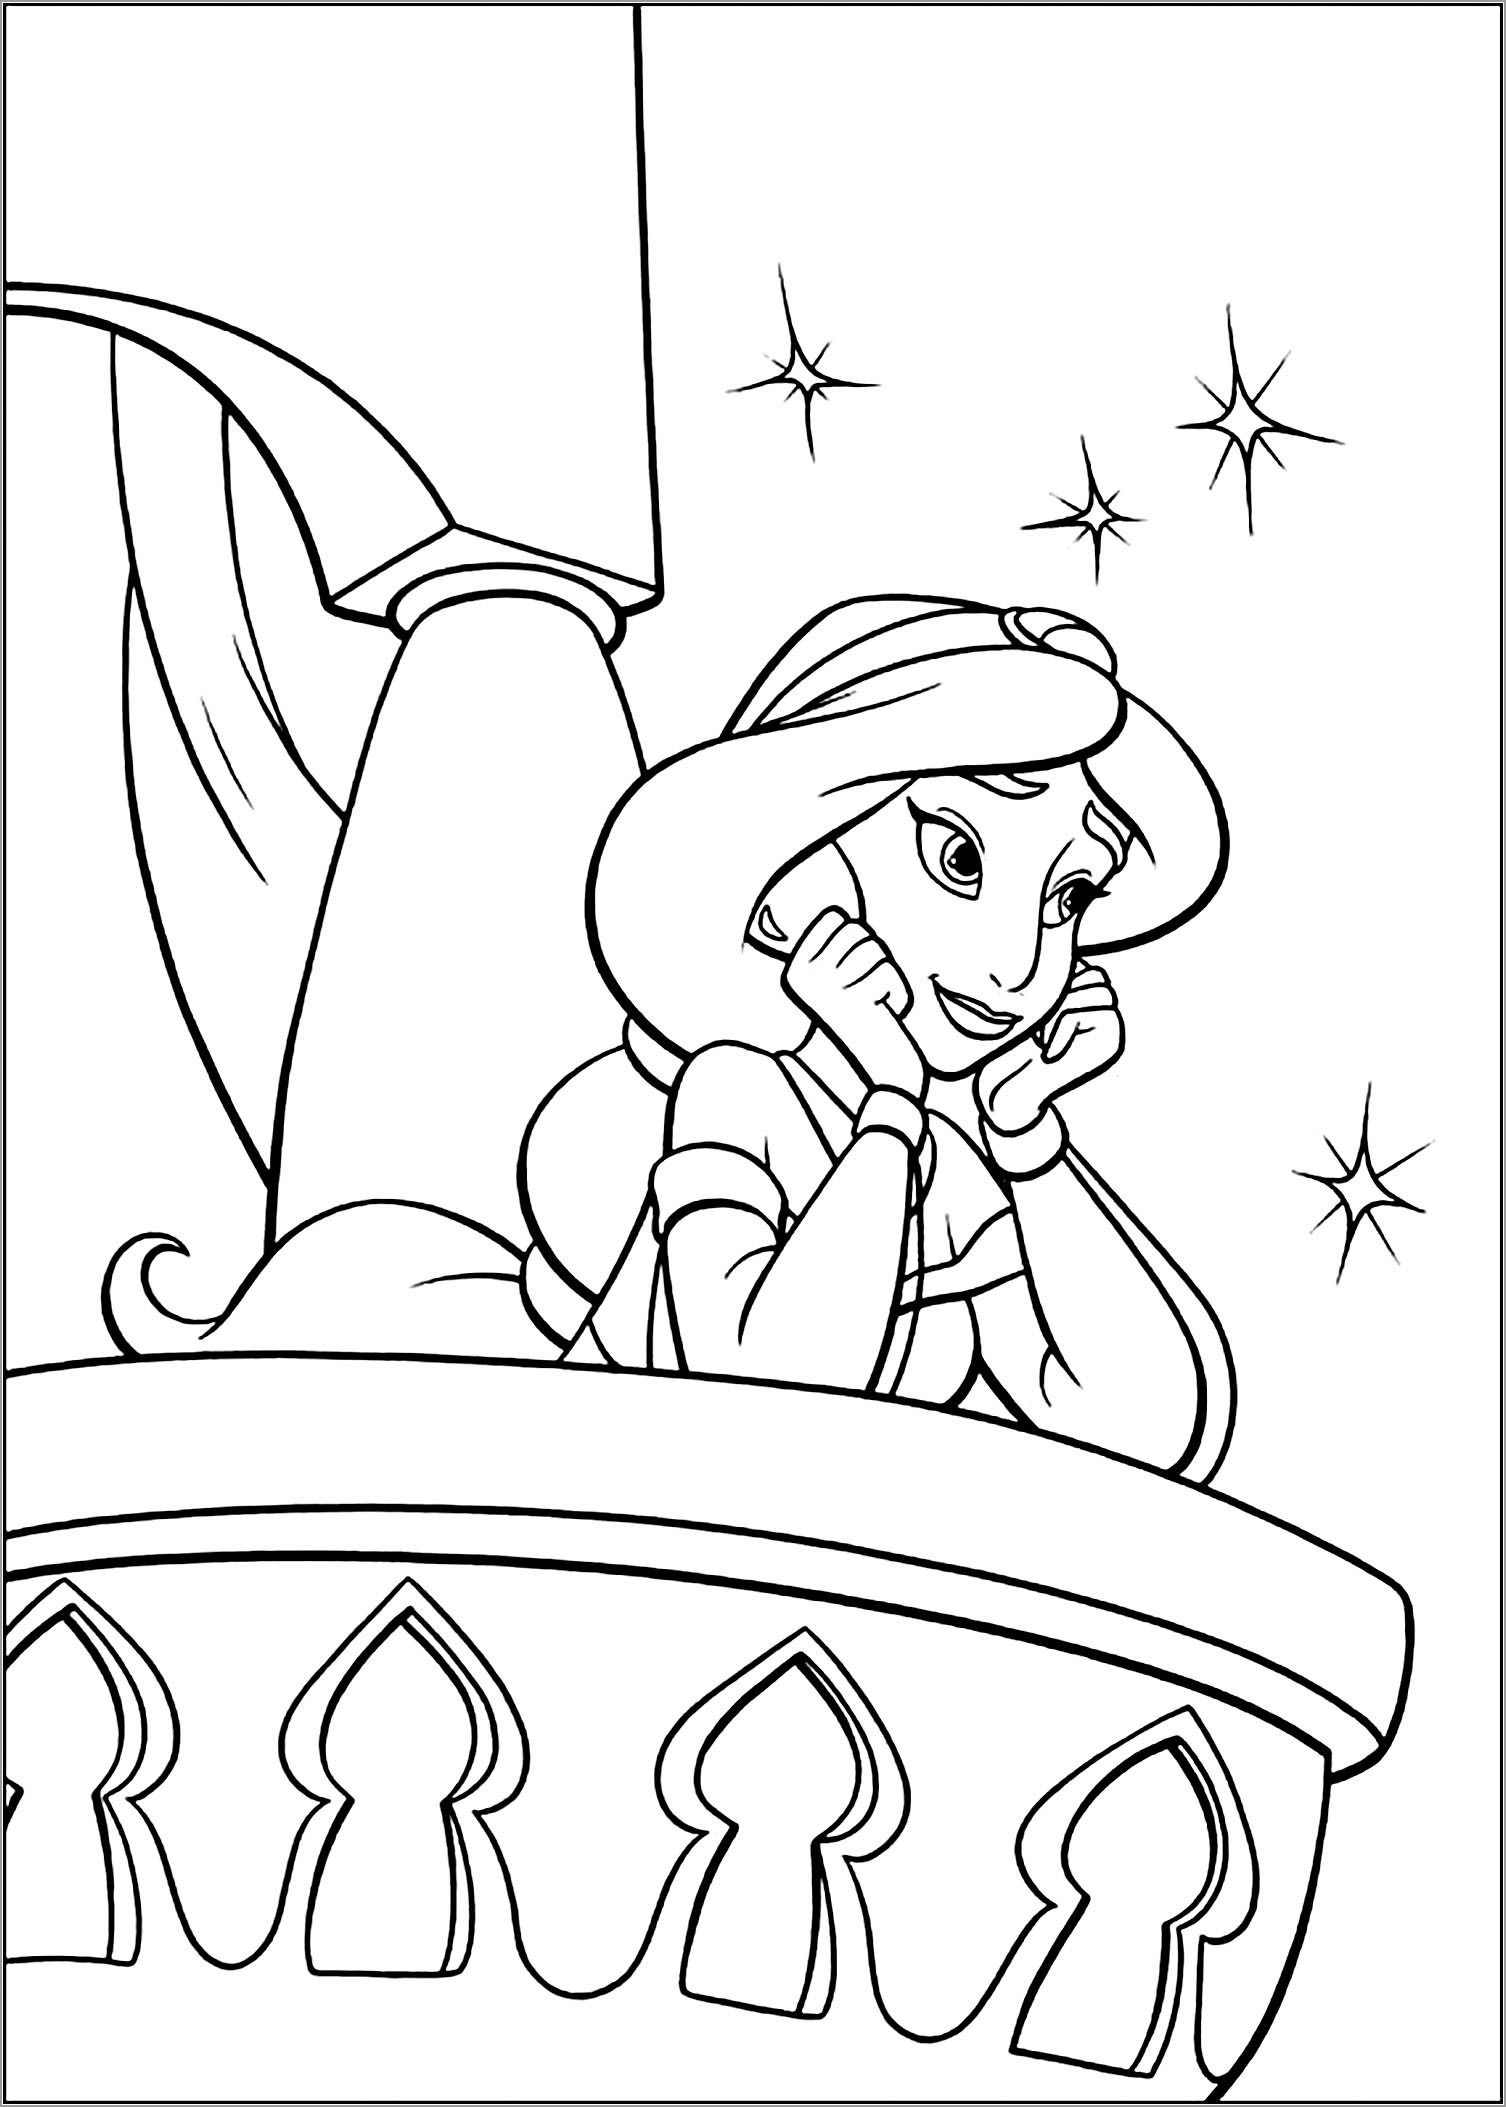 Aladdin Coloring Pages Jasmine   ColoringBay